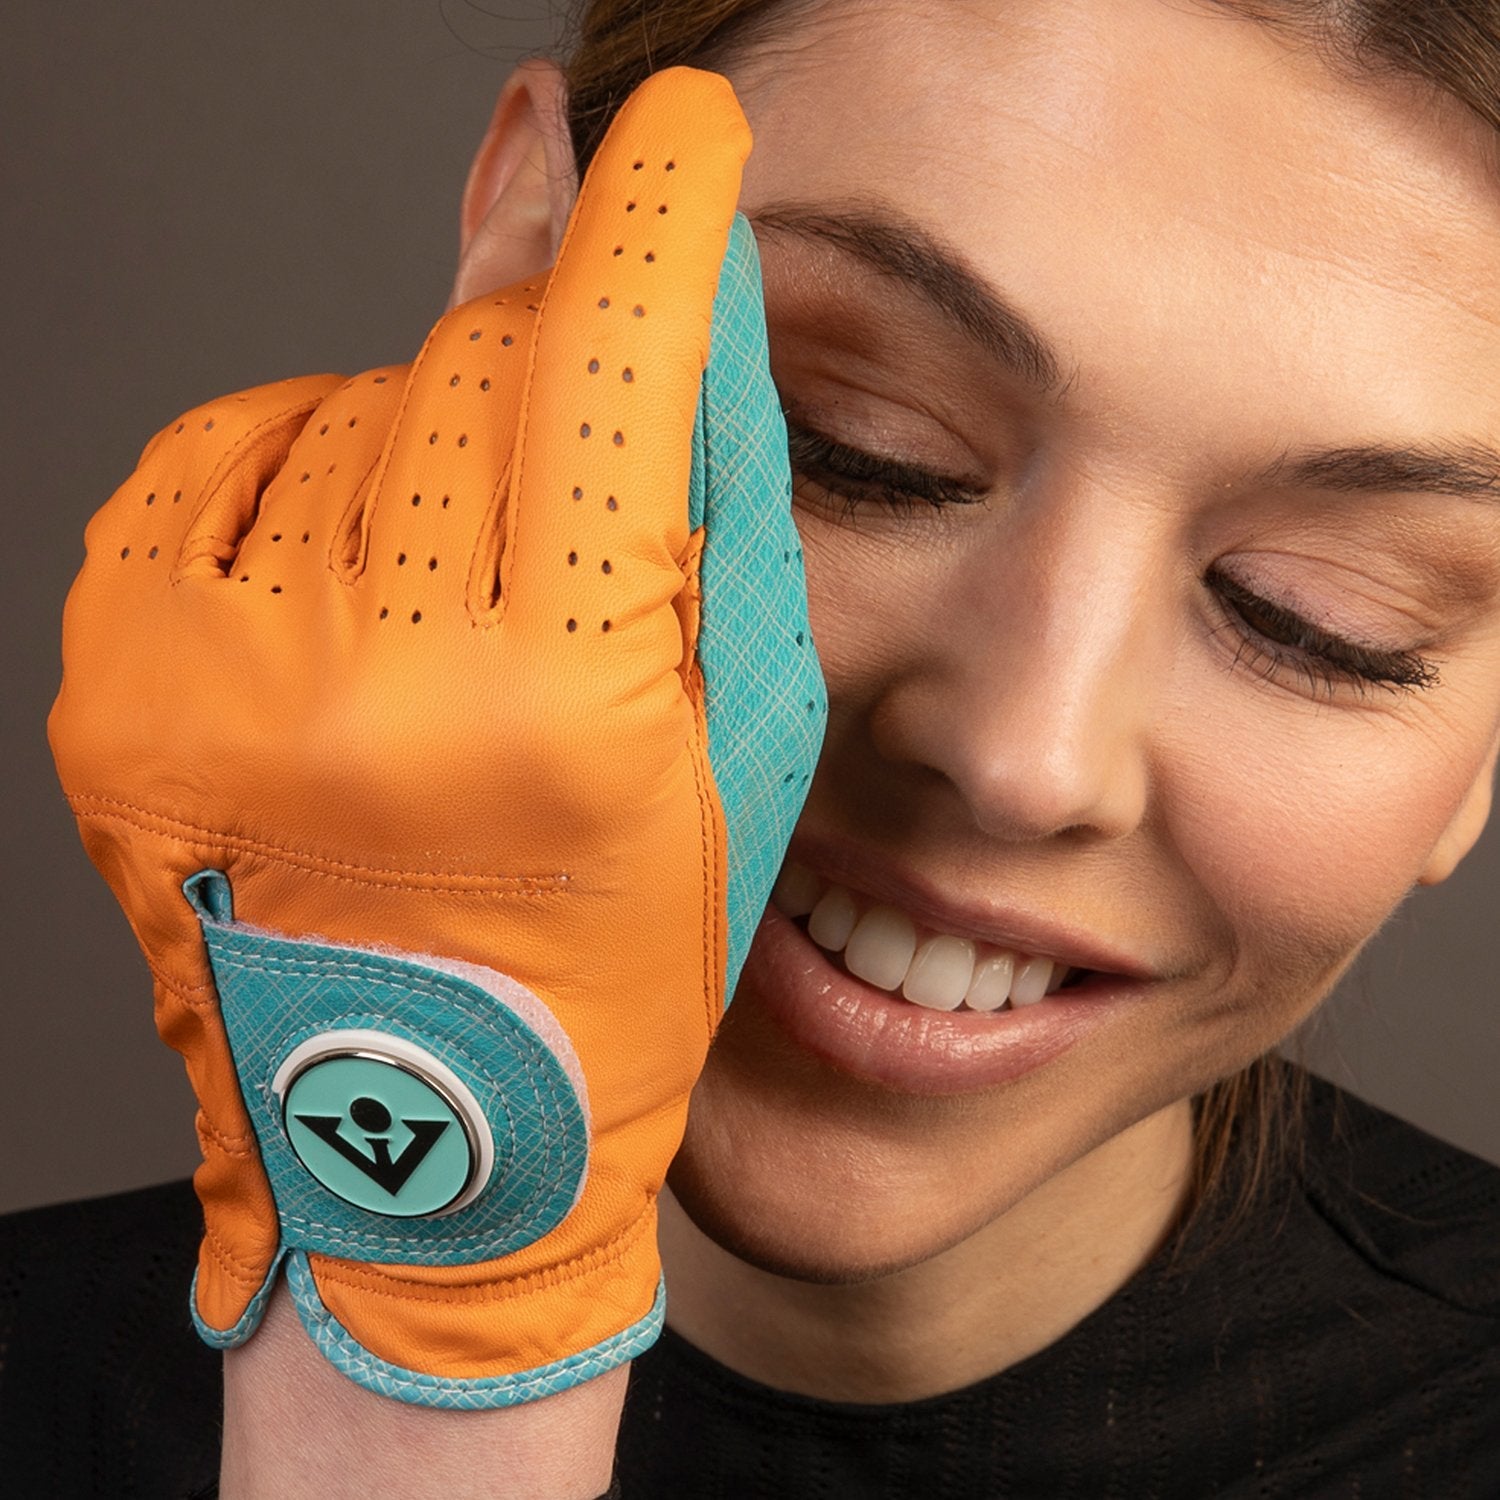 Model smiling with an orange woman's golf glove close up in front of her face.